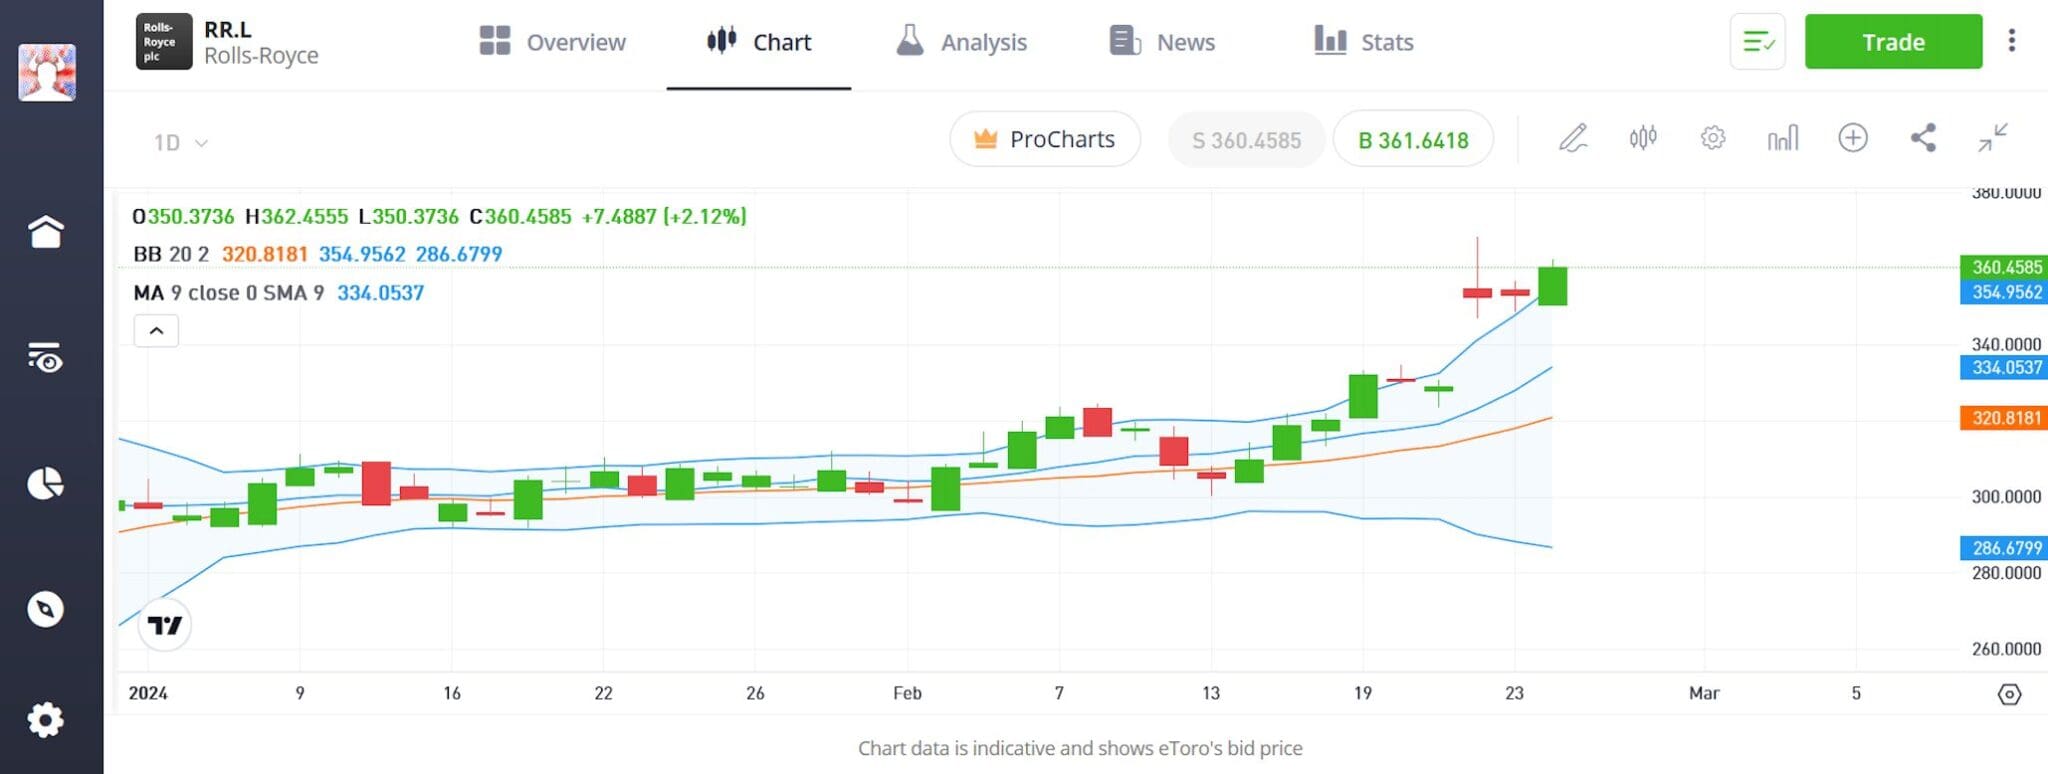 Carrying out technical analysis on Rolls-Royce shares using an eToro account